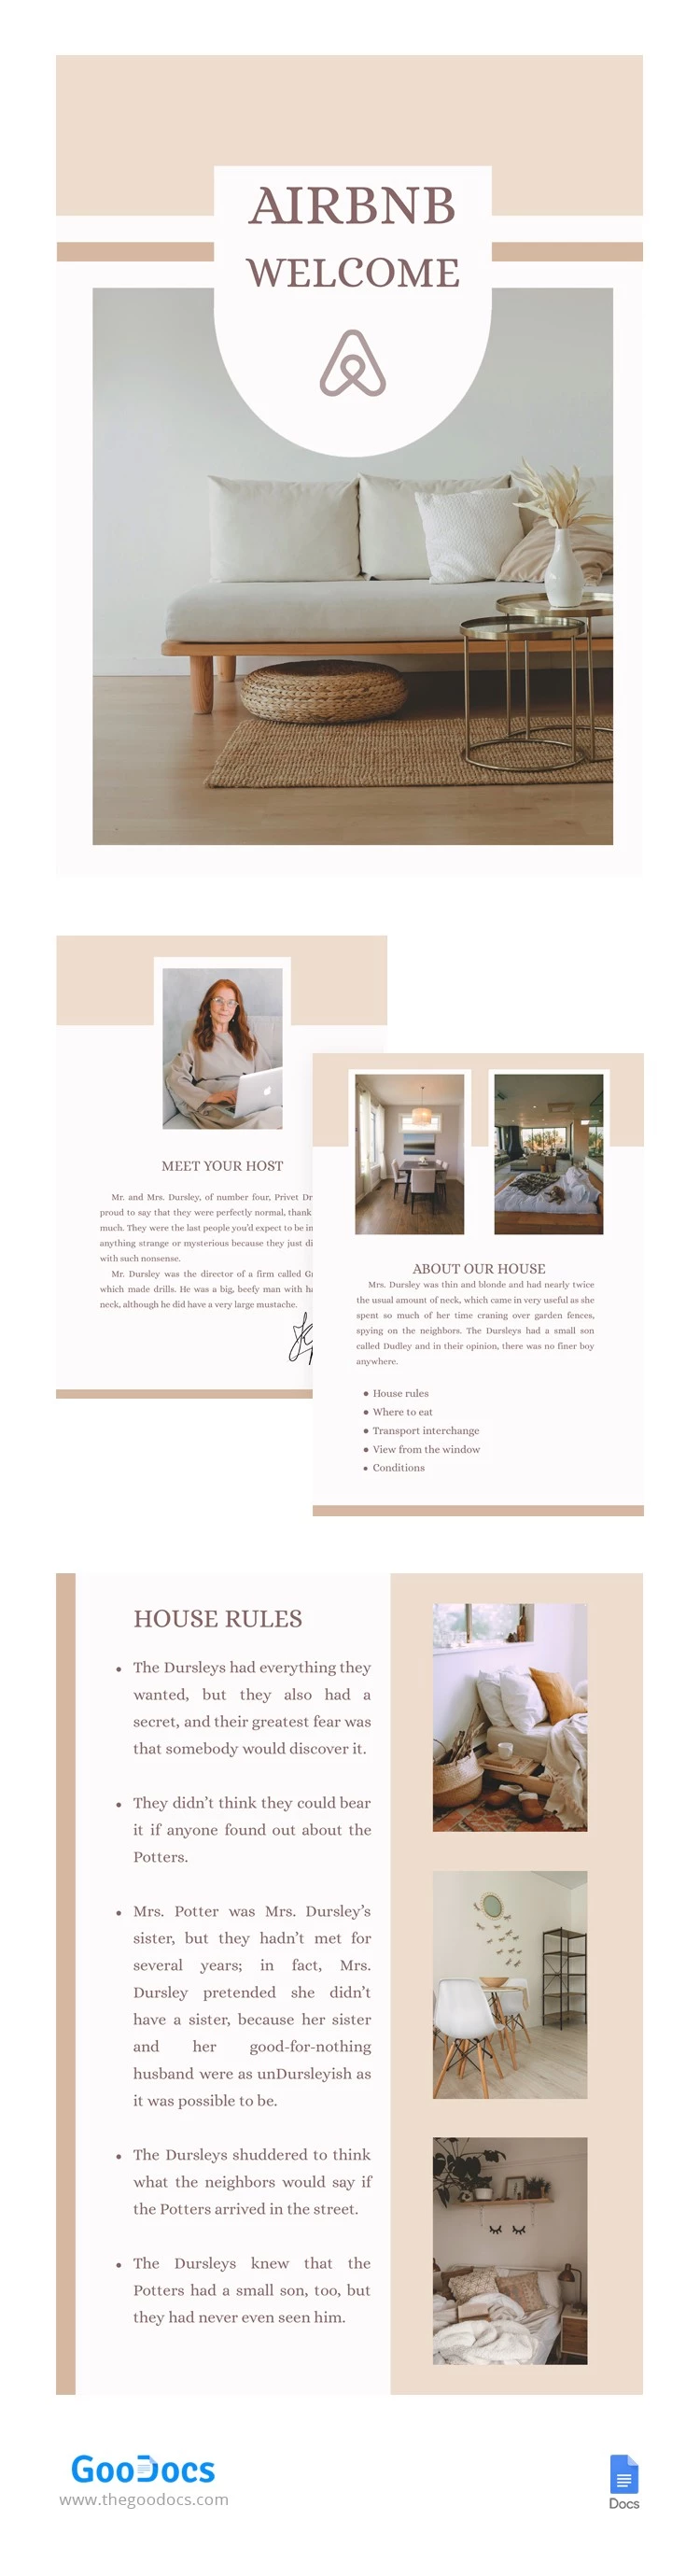 Comfortable Airbnb Welcome Book - free Google Docs Template - 10062236